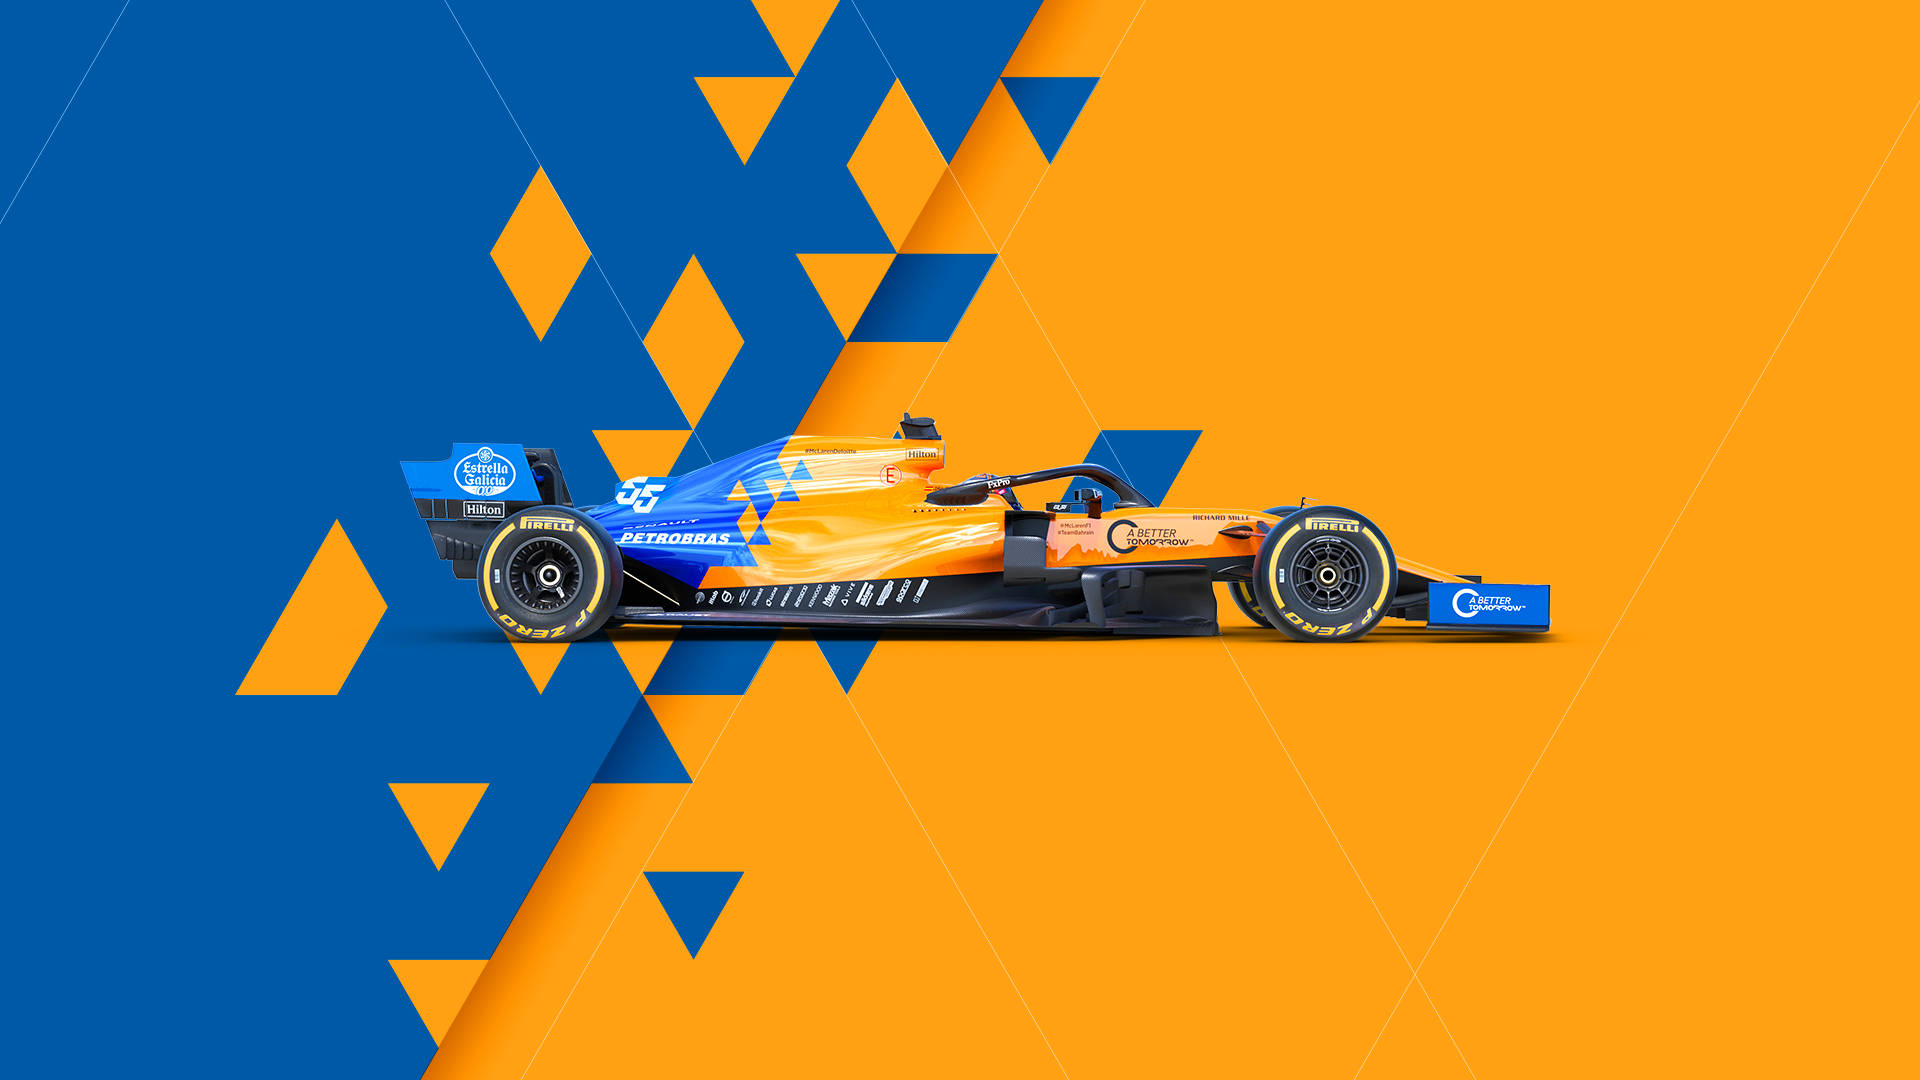 Free F1 Wallpaper Downloads, [400+] F1 Wallpapers for FREE 